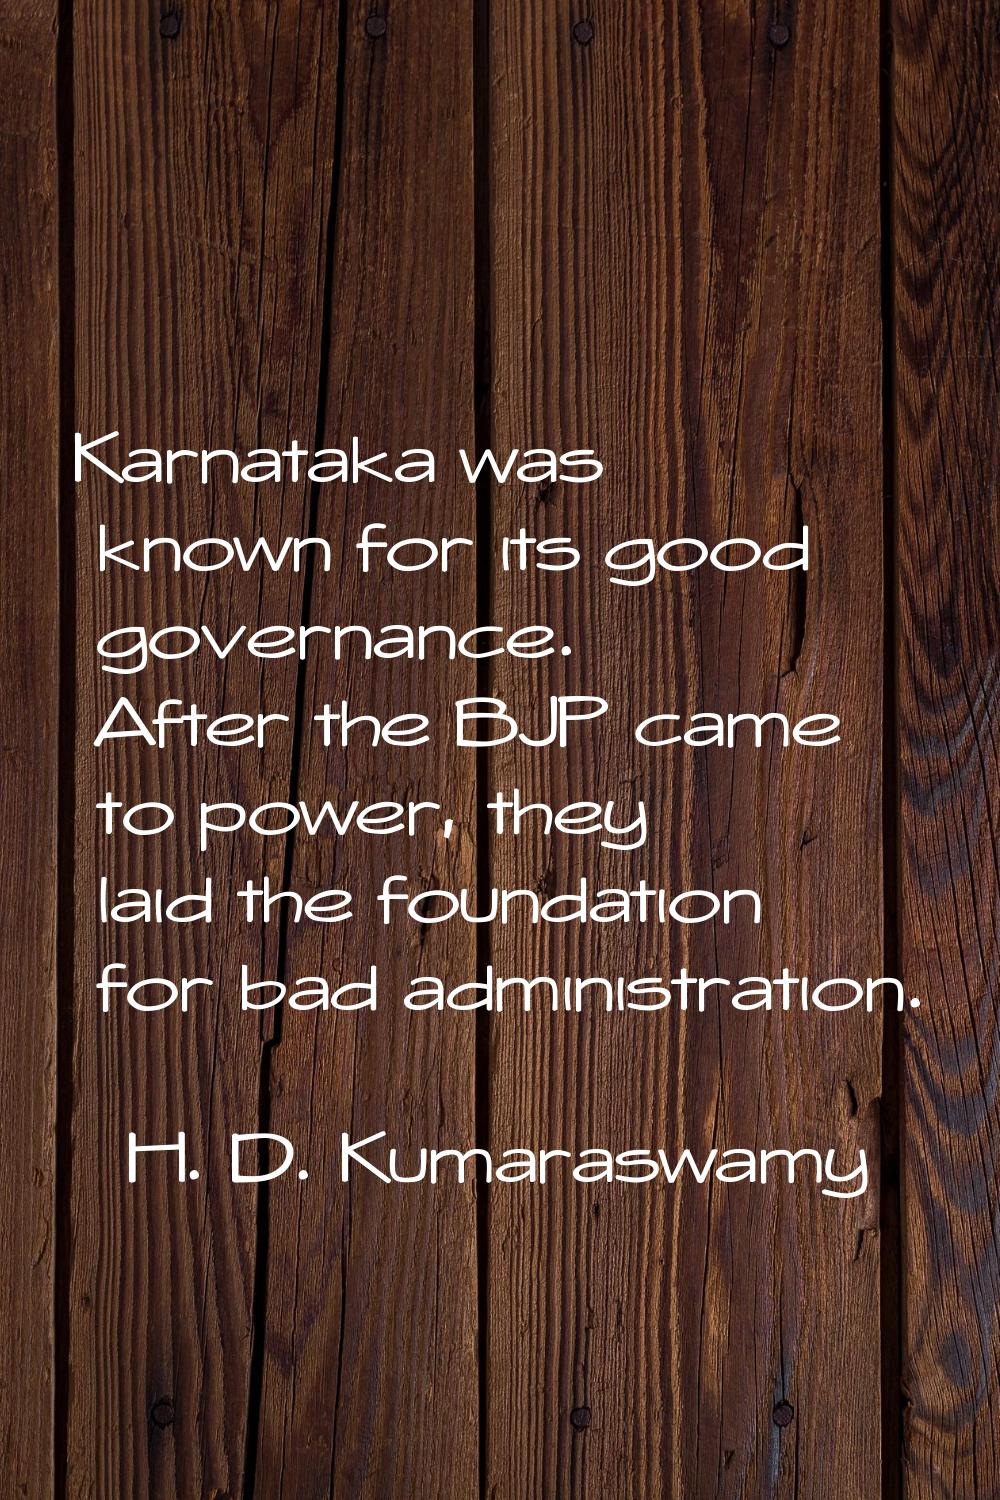 Karnataka was known for its good governance. After the BJP came to power, they laid the foundation 